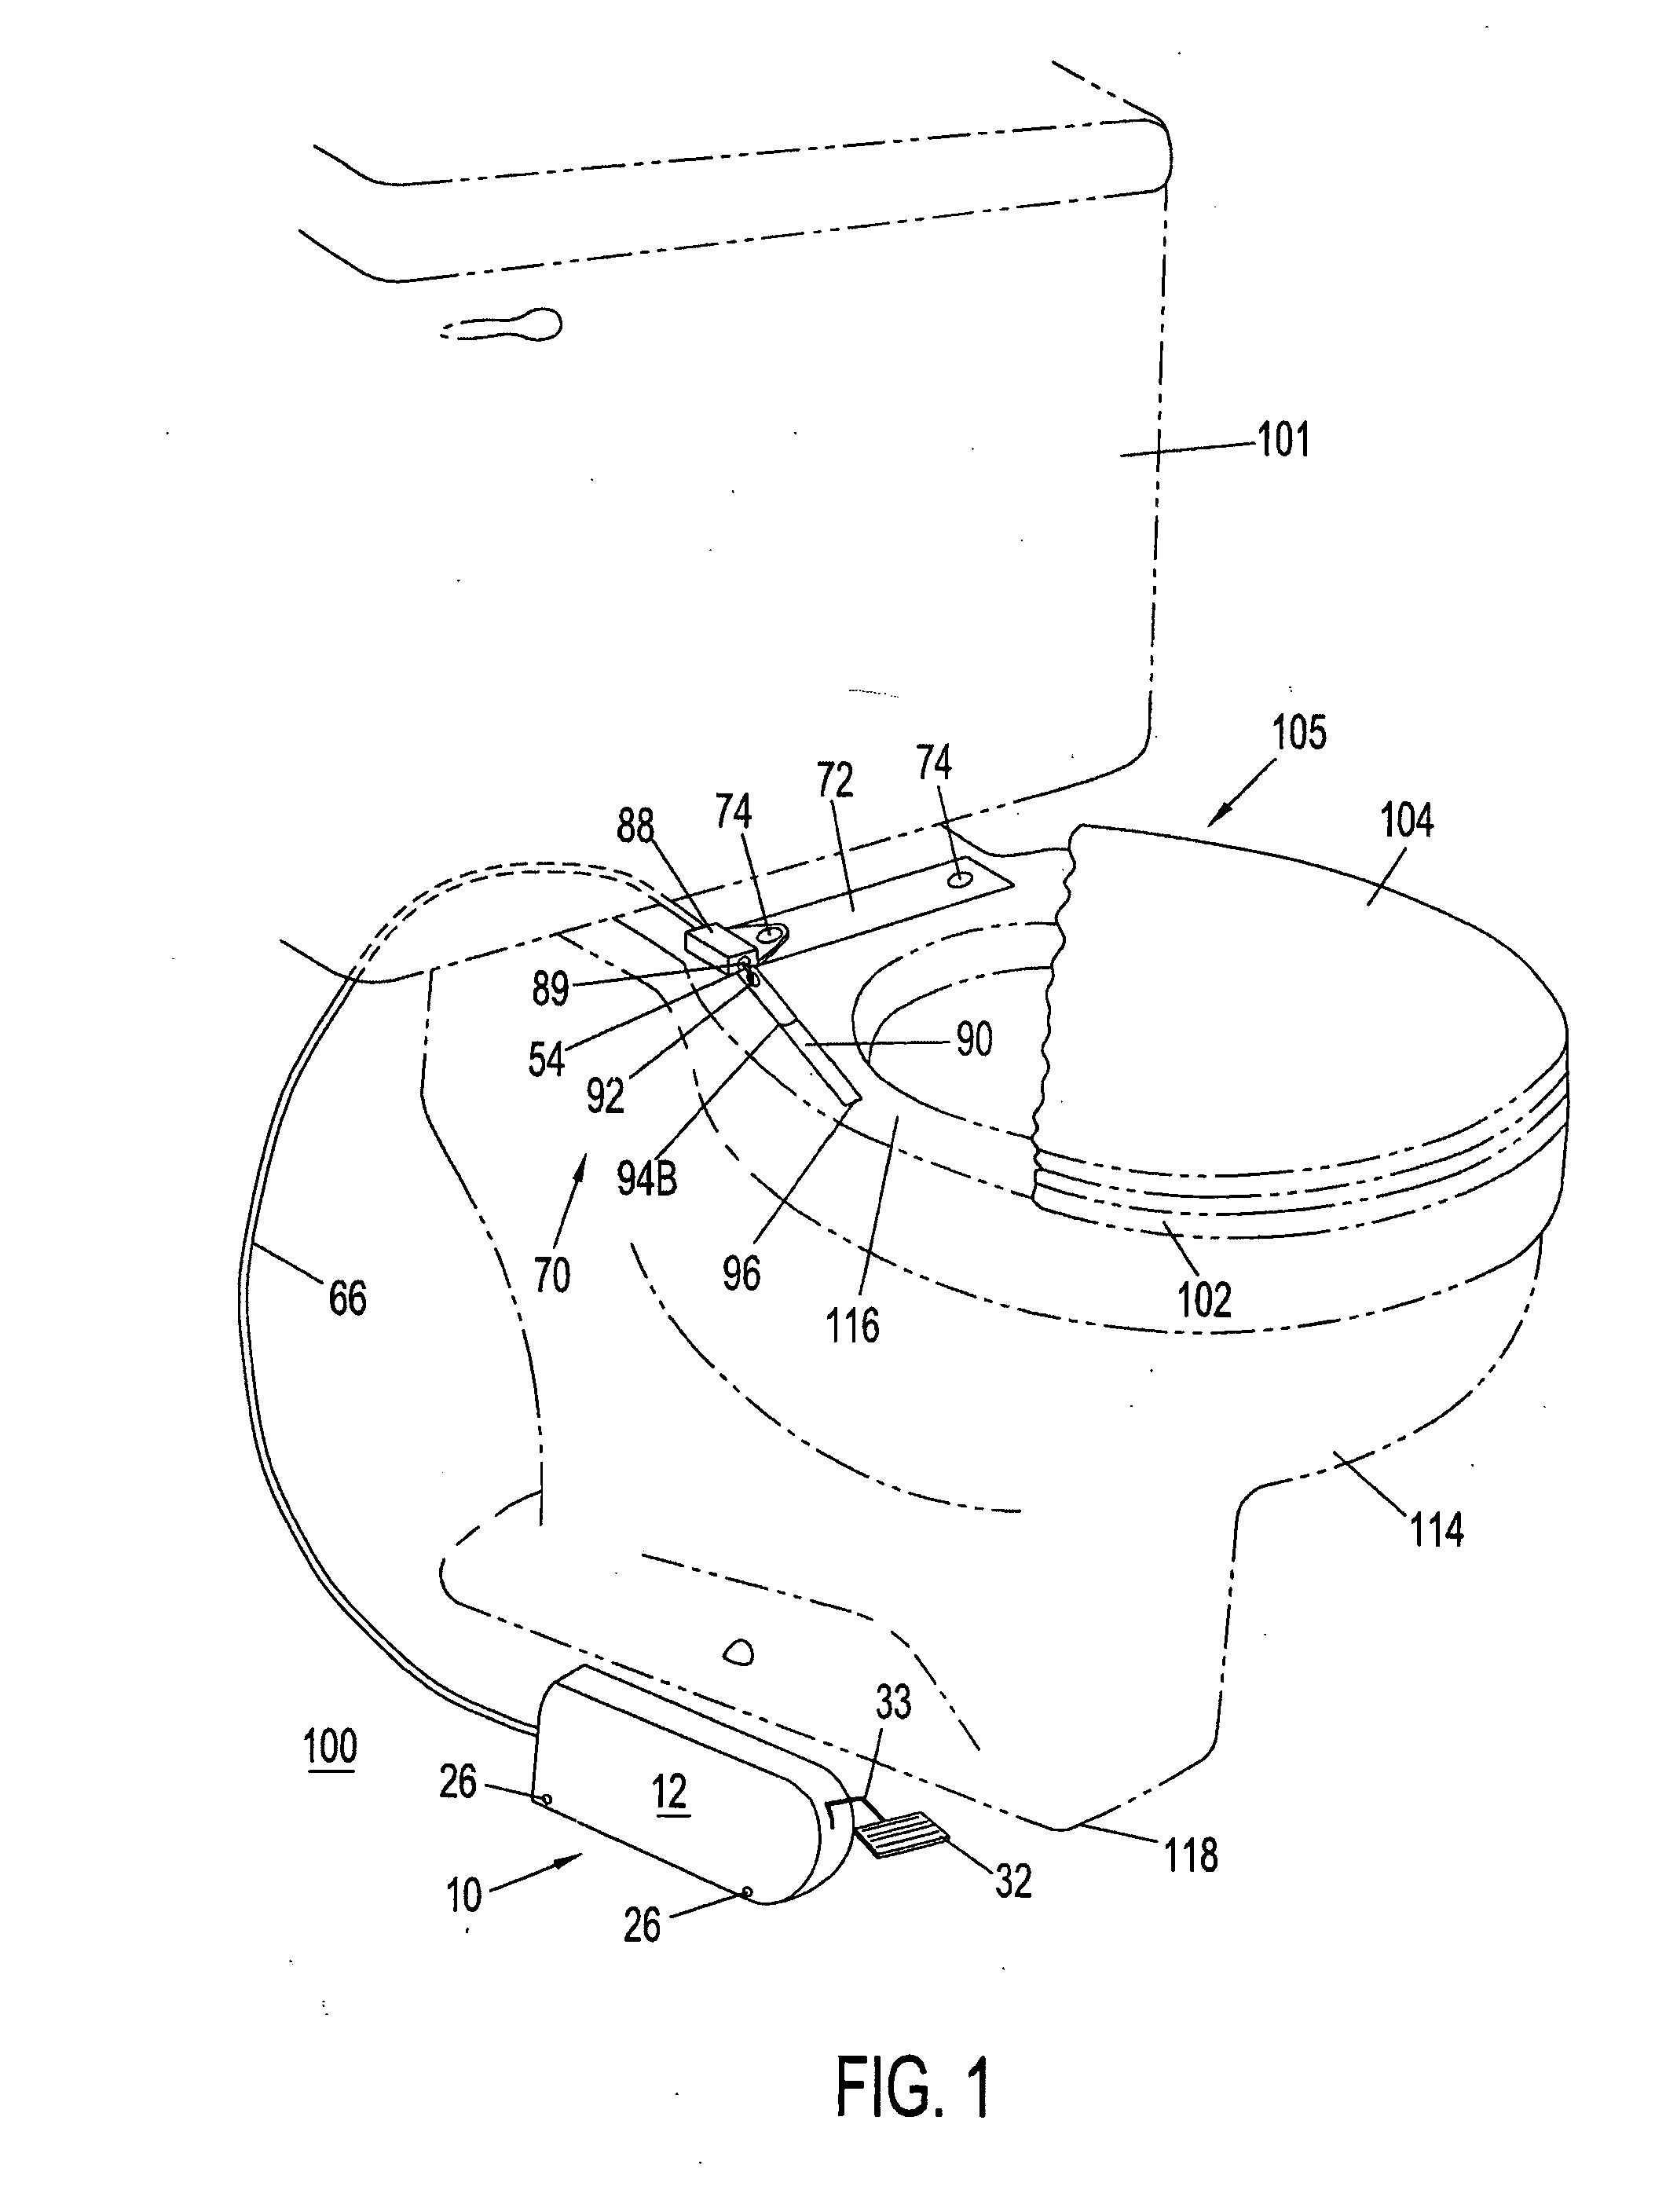 Foot actuated toilet seat lifting and self-lowering mechanism